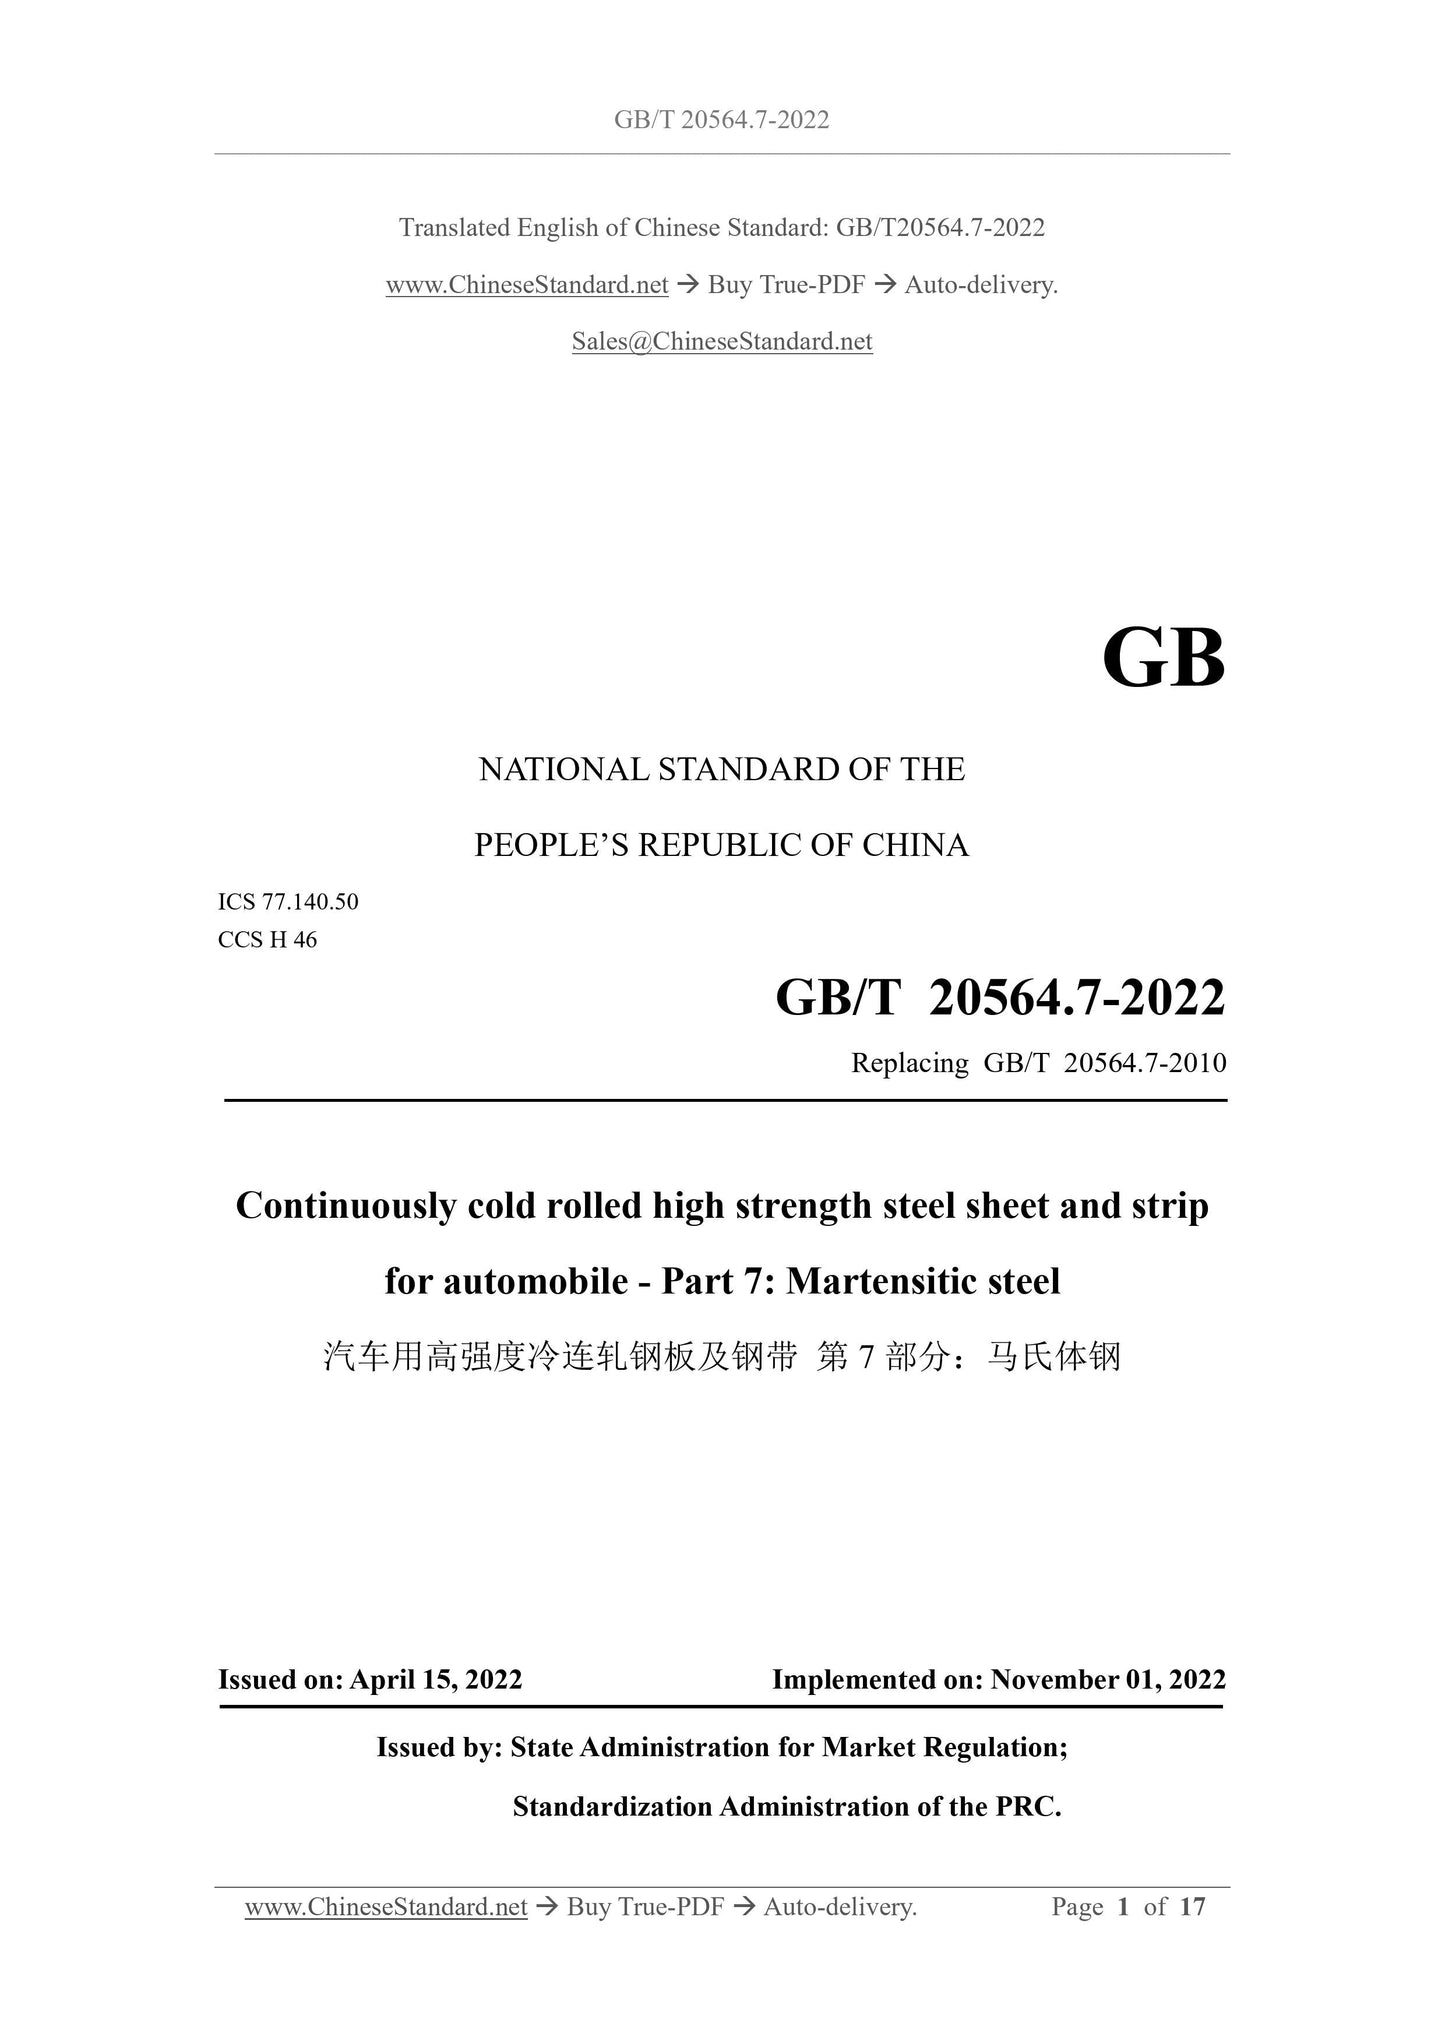 GB/T 20564.7-2022 Page 1